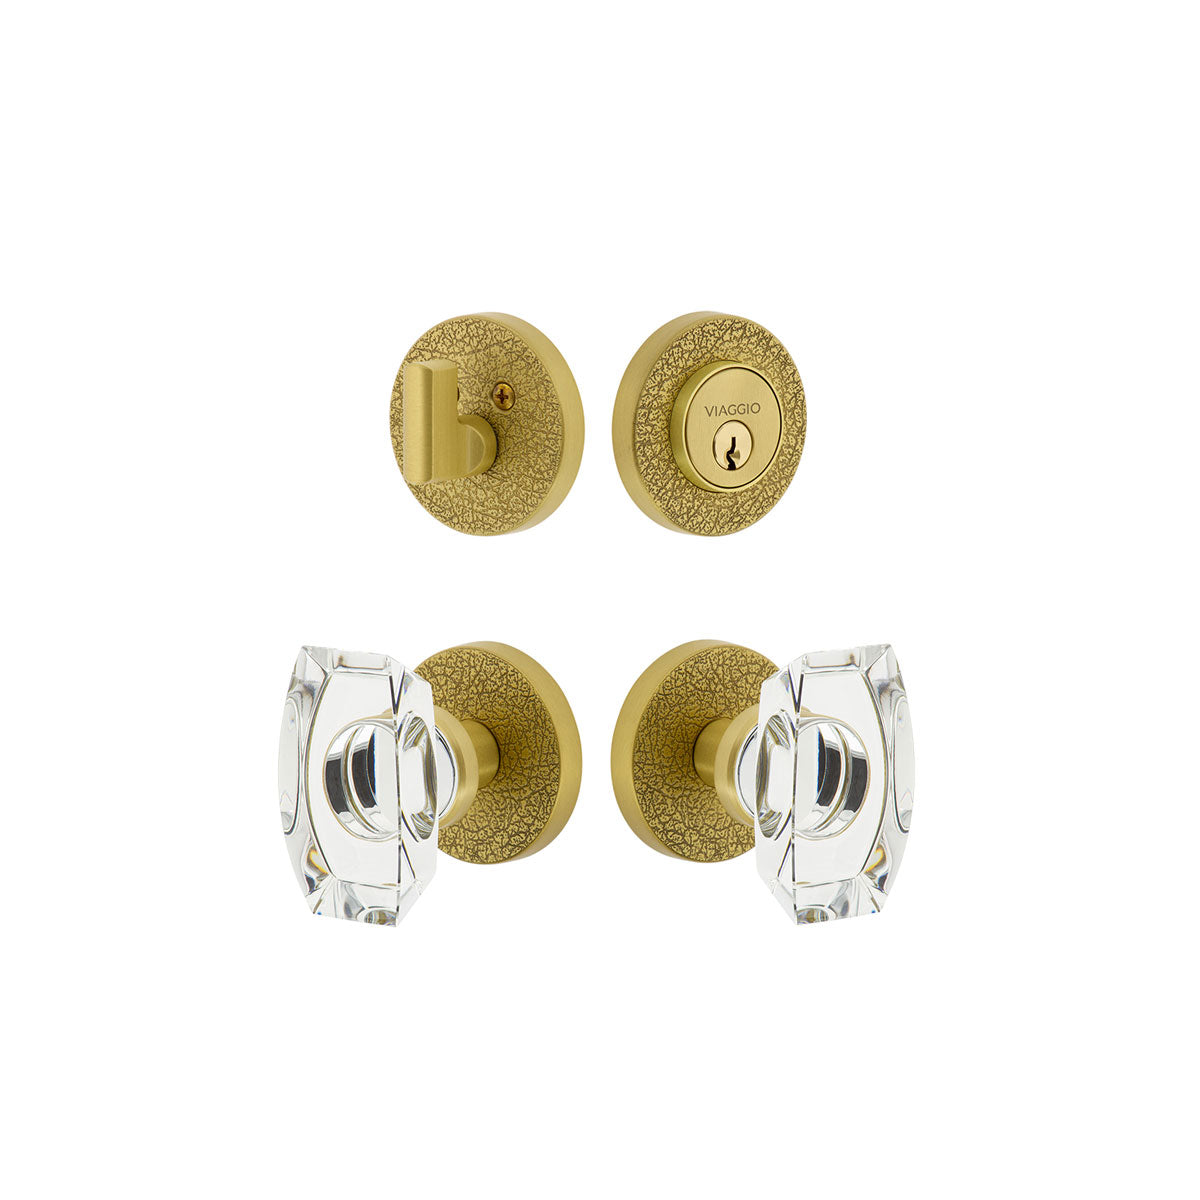 Circolo Leather Rosette Entry Set with Stella Knob in Satin Brass